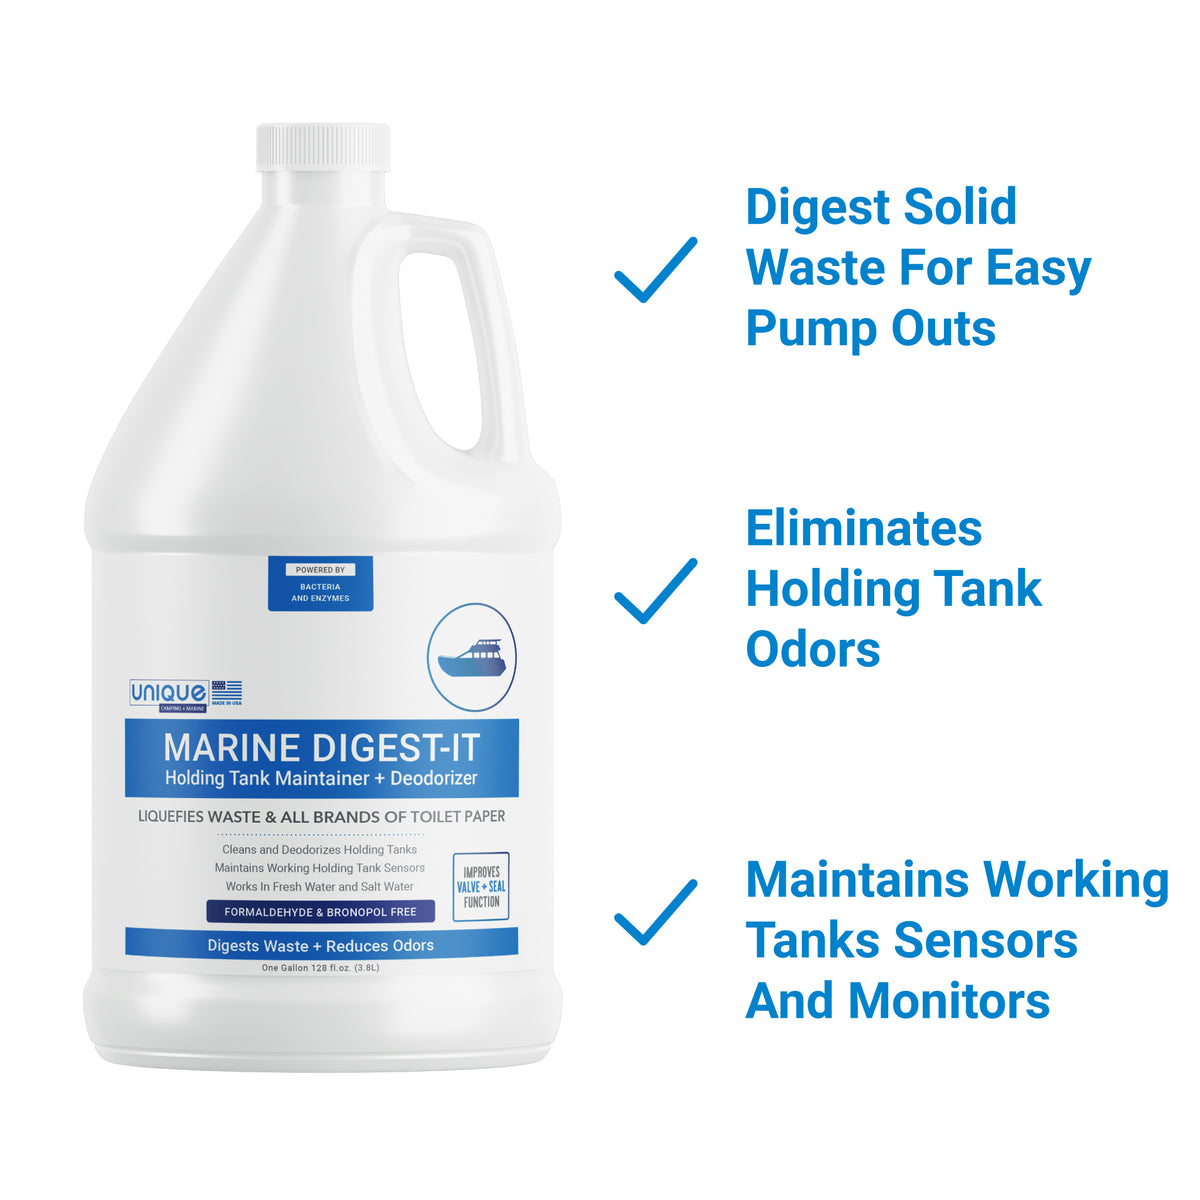 Marine Digest-It Holding Tank Treatment 128 oz. Liquifies waste and Digests all brands of Toilet paper. Unique Camping + Marine